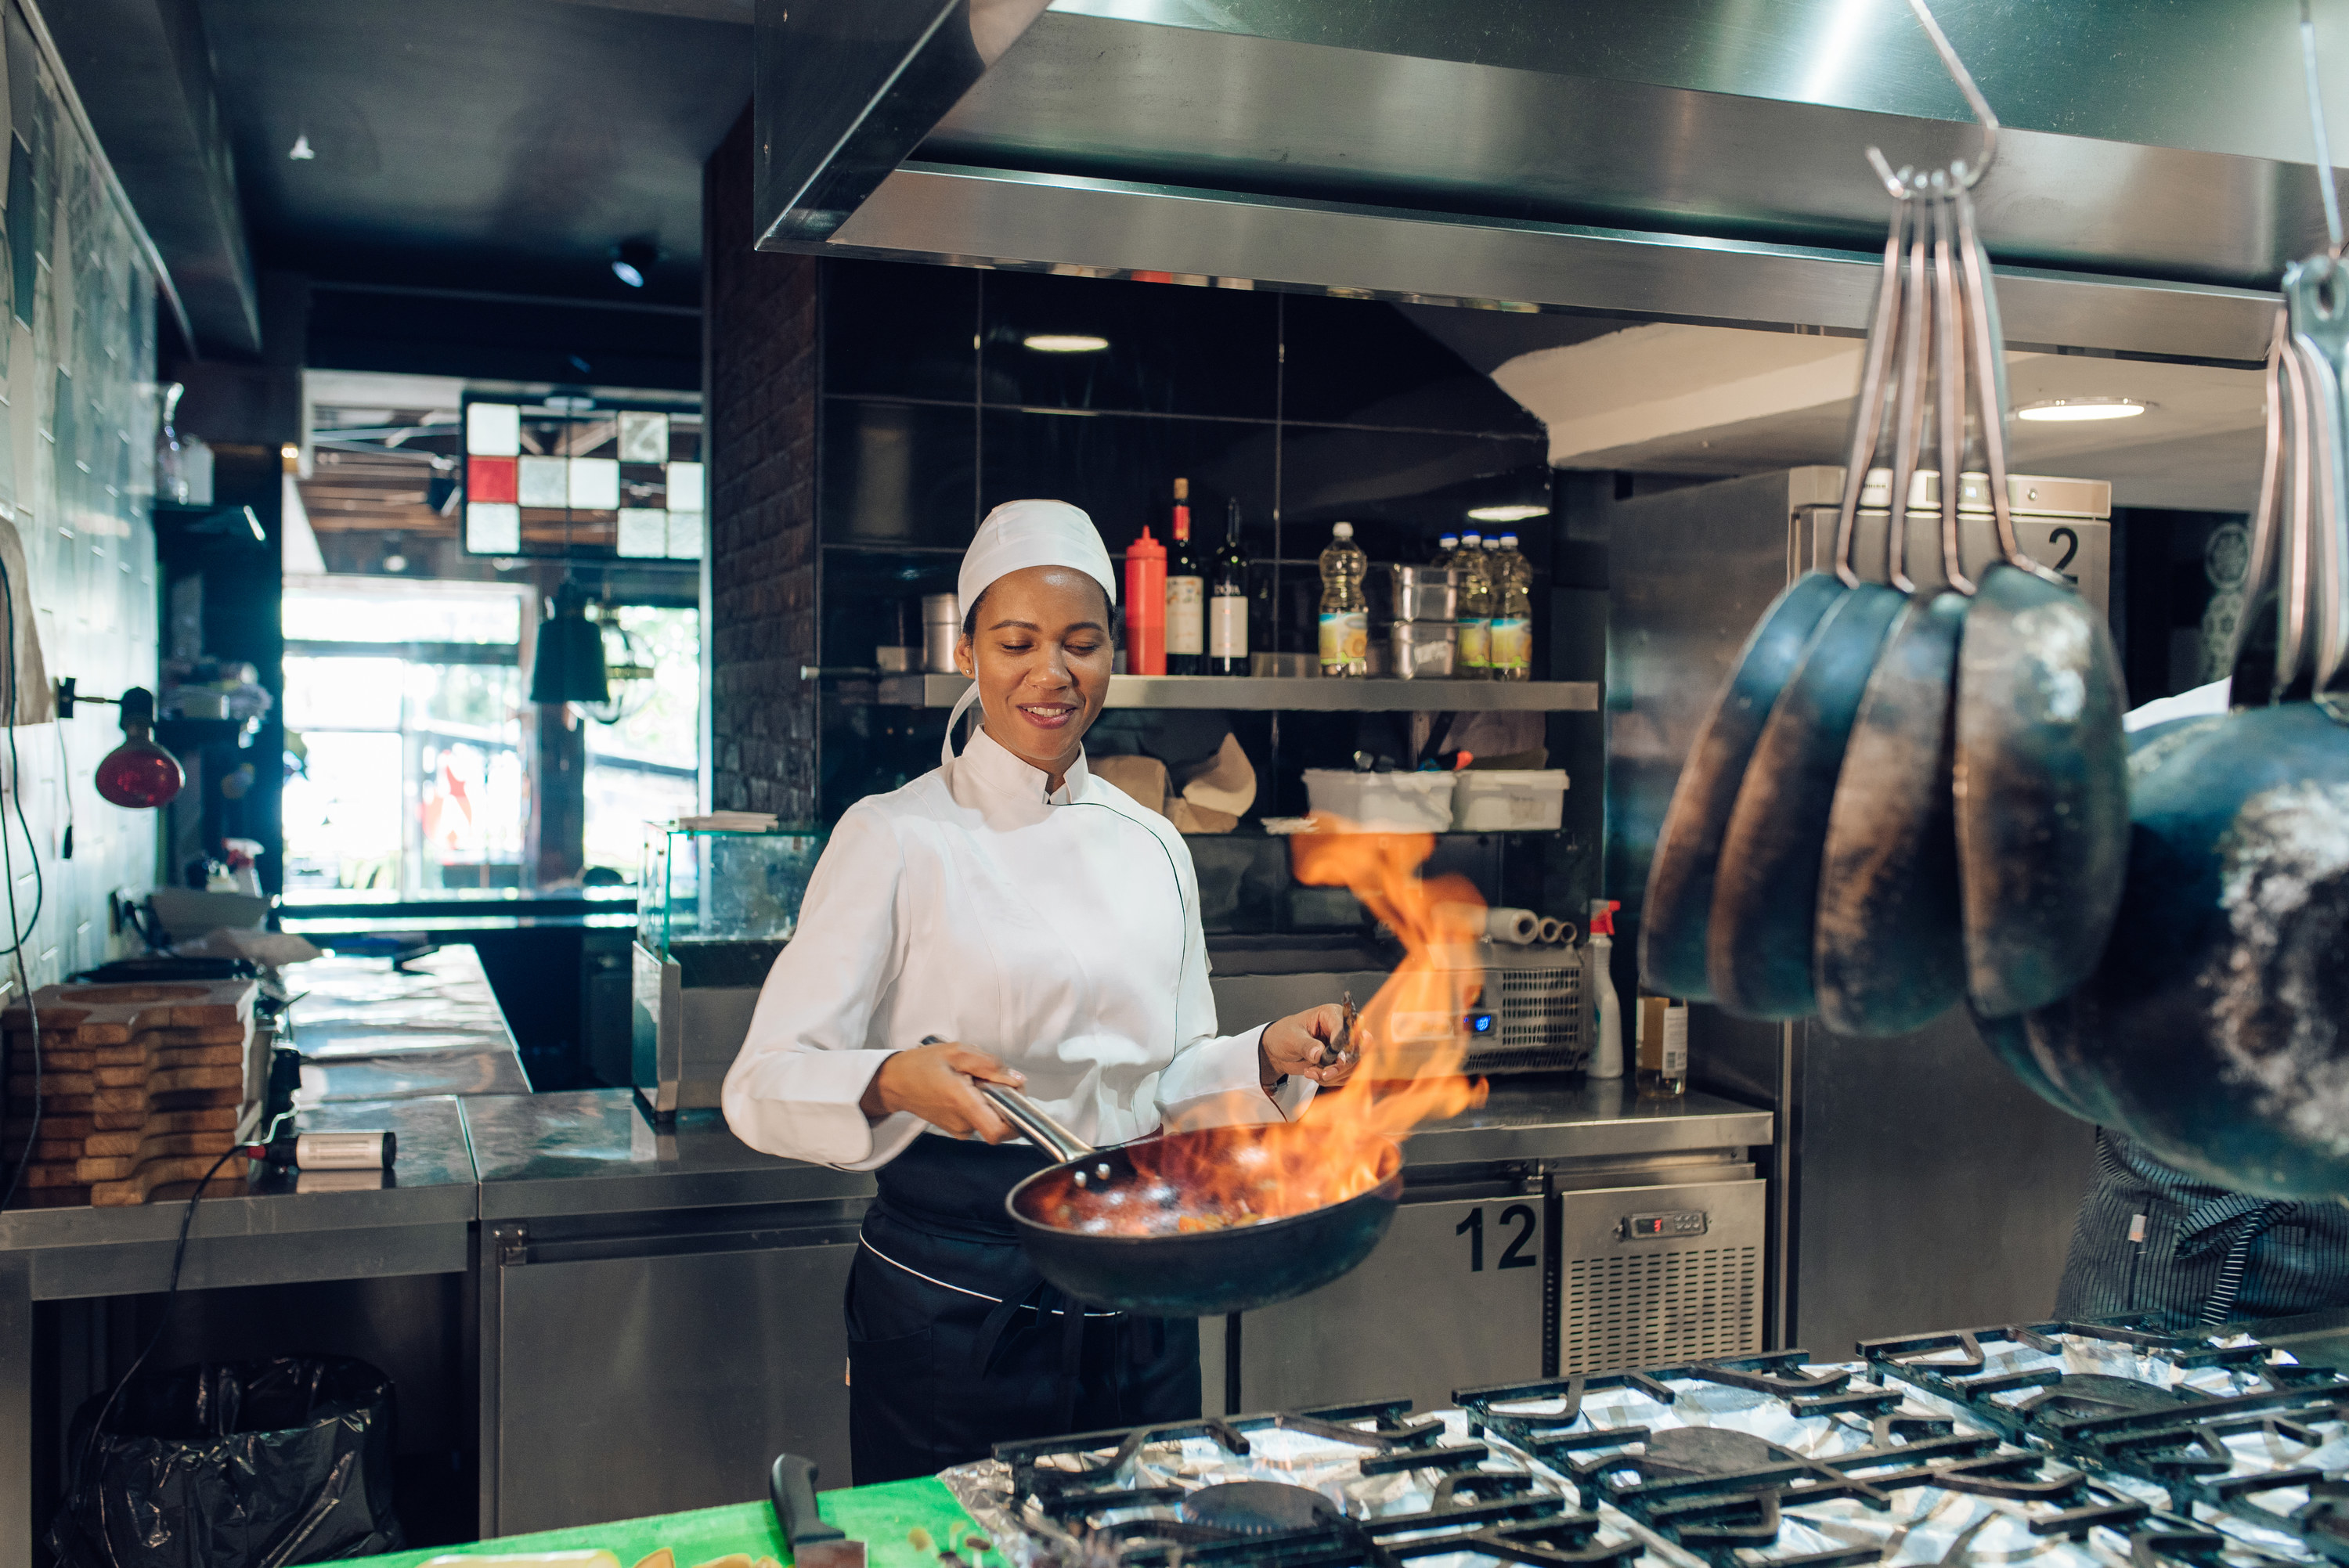 Female chef flambéing food in a restaurant kitchen